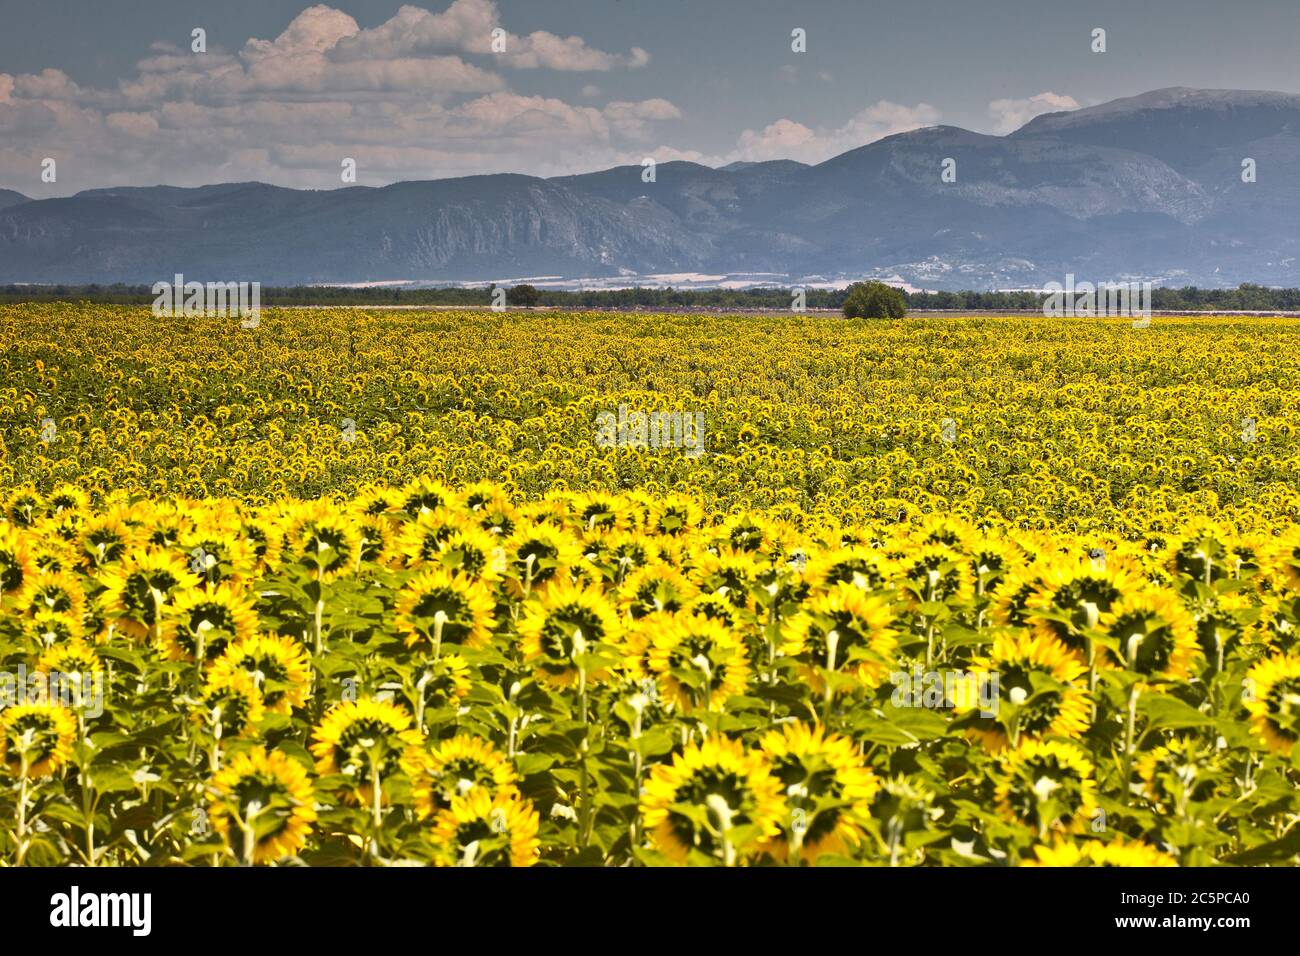 Sunflowers on the plateau de Valensole in Provence, France. Stock Photo